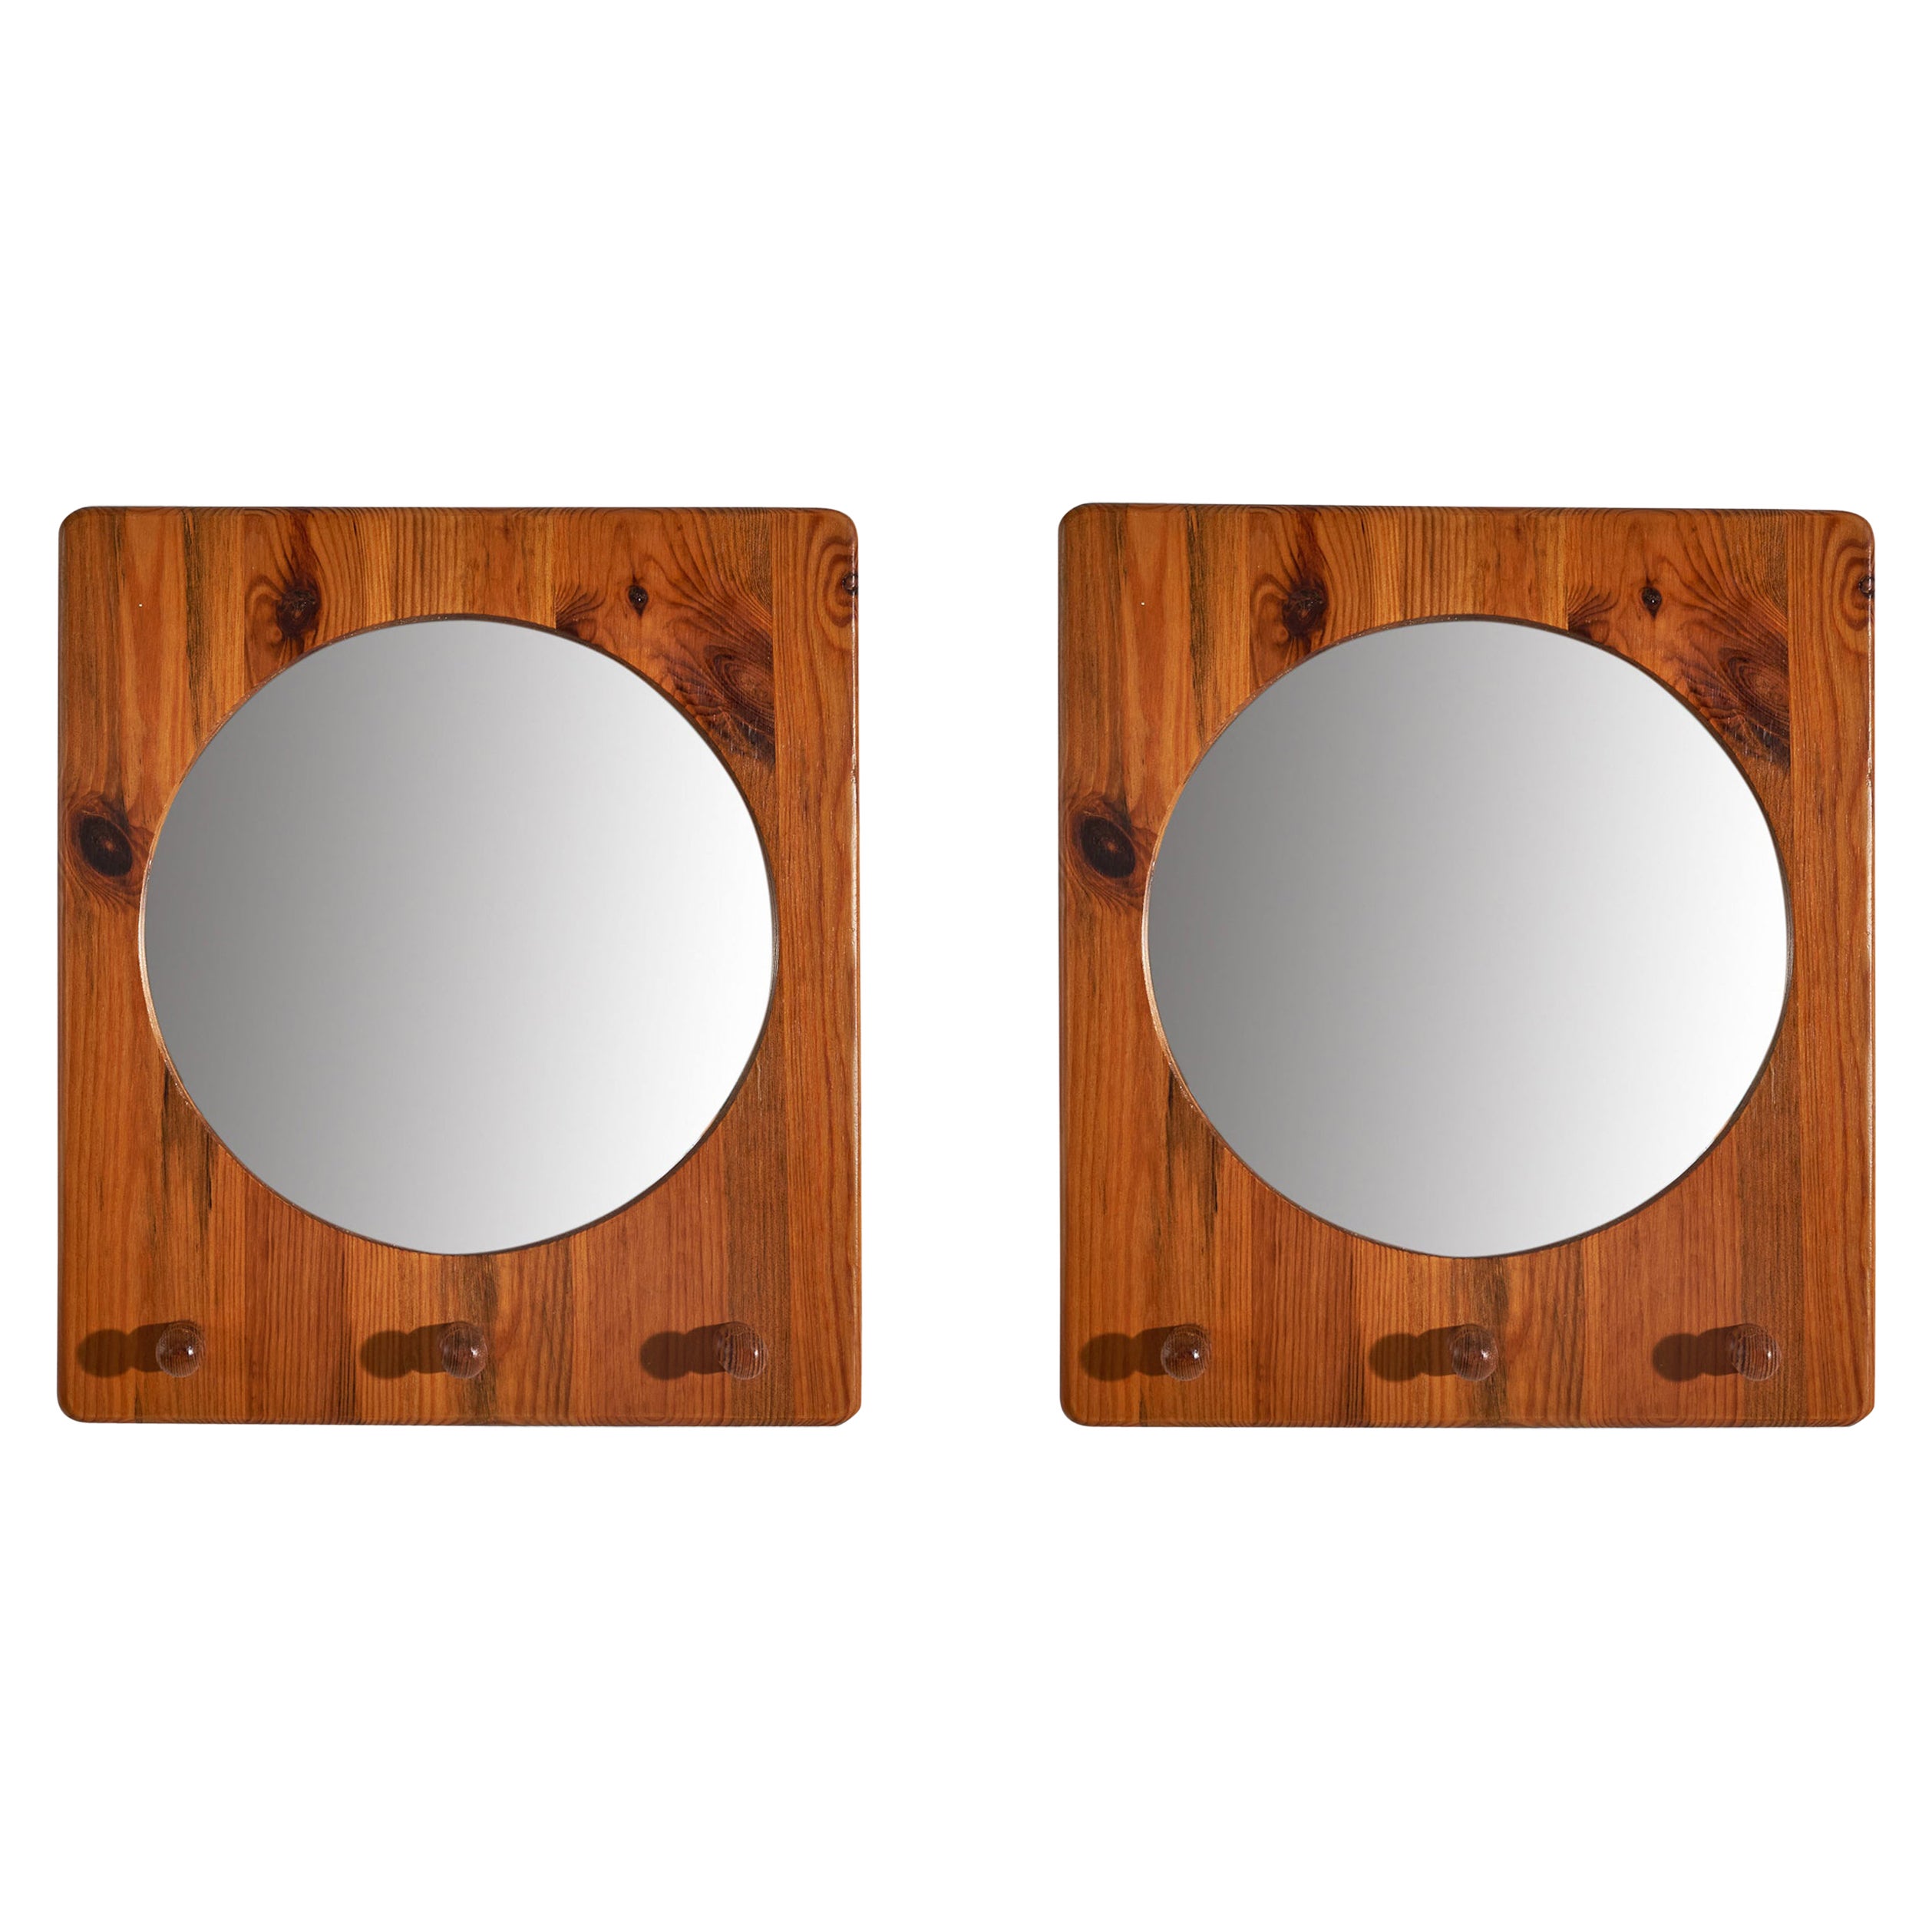 Stig Johnsson, Pair of Wall Mirrors, Pine, Sweden, 1970s